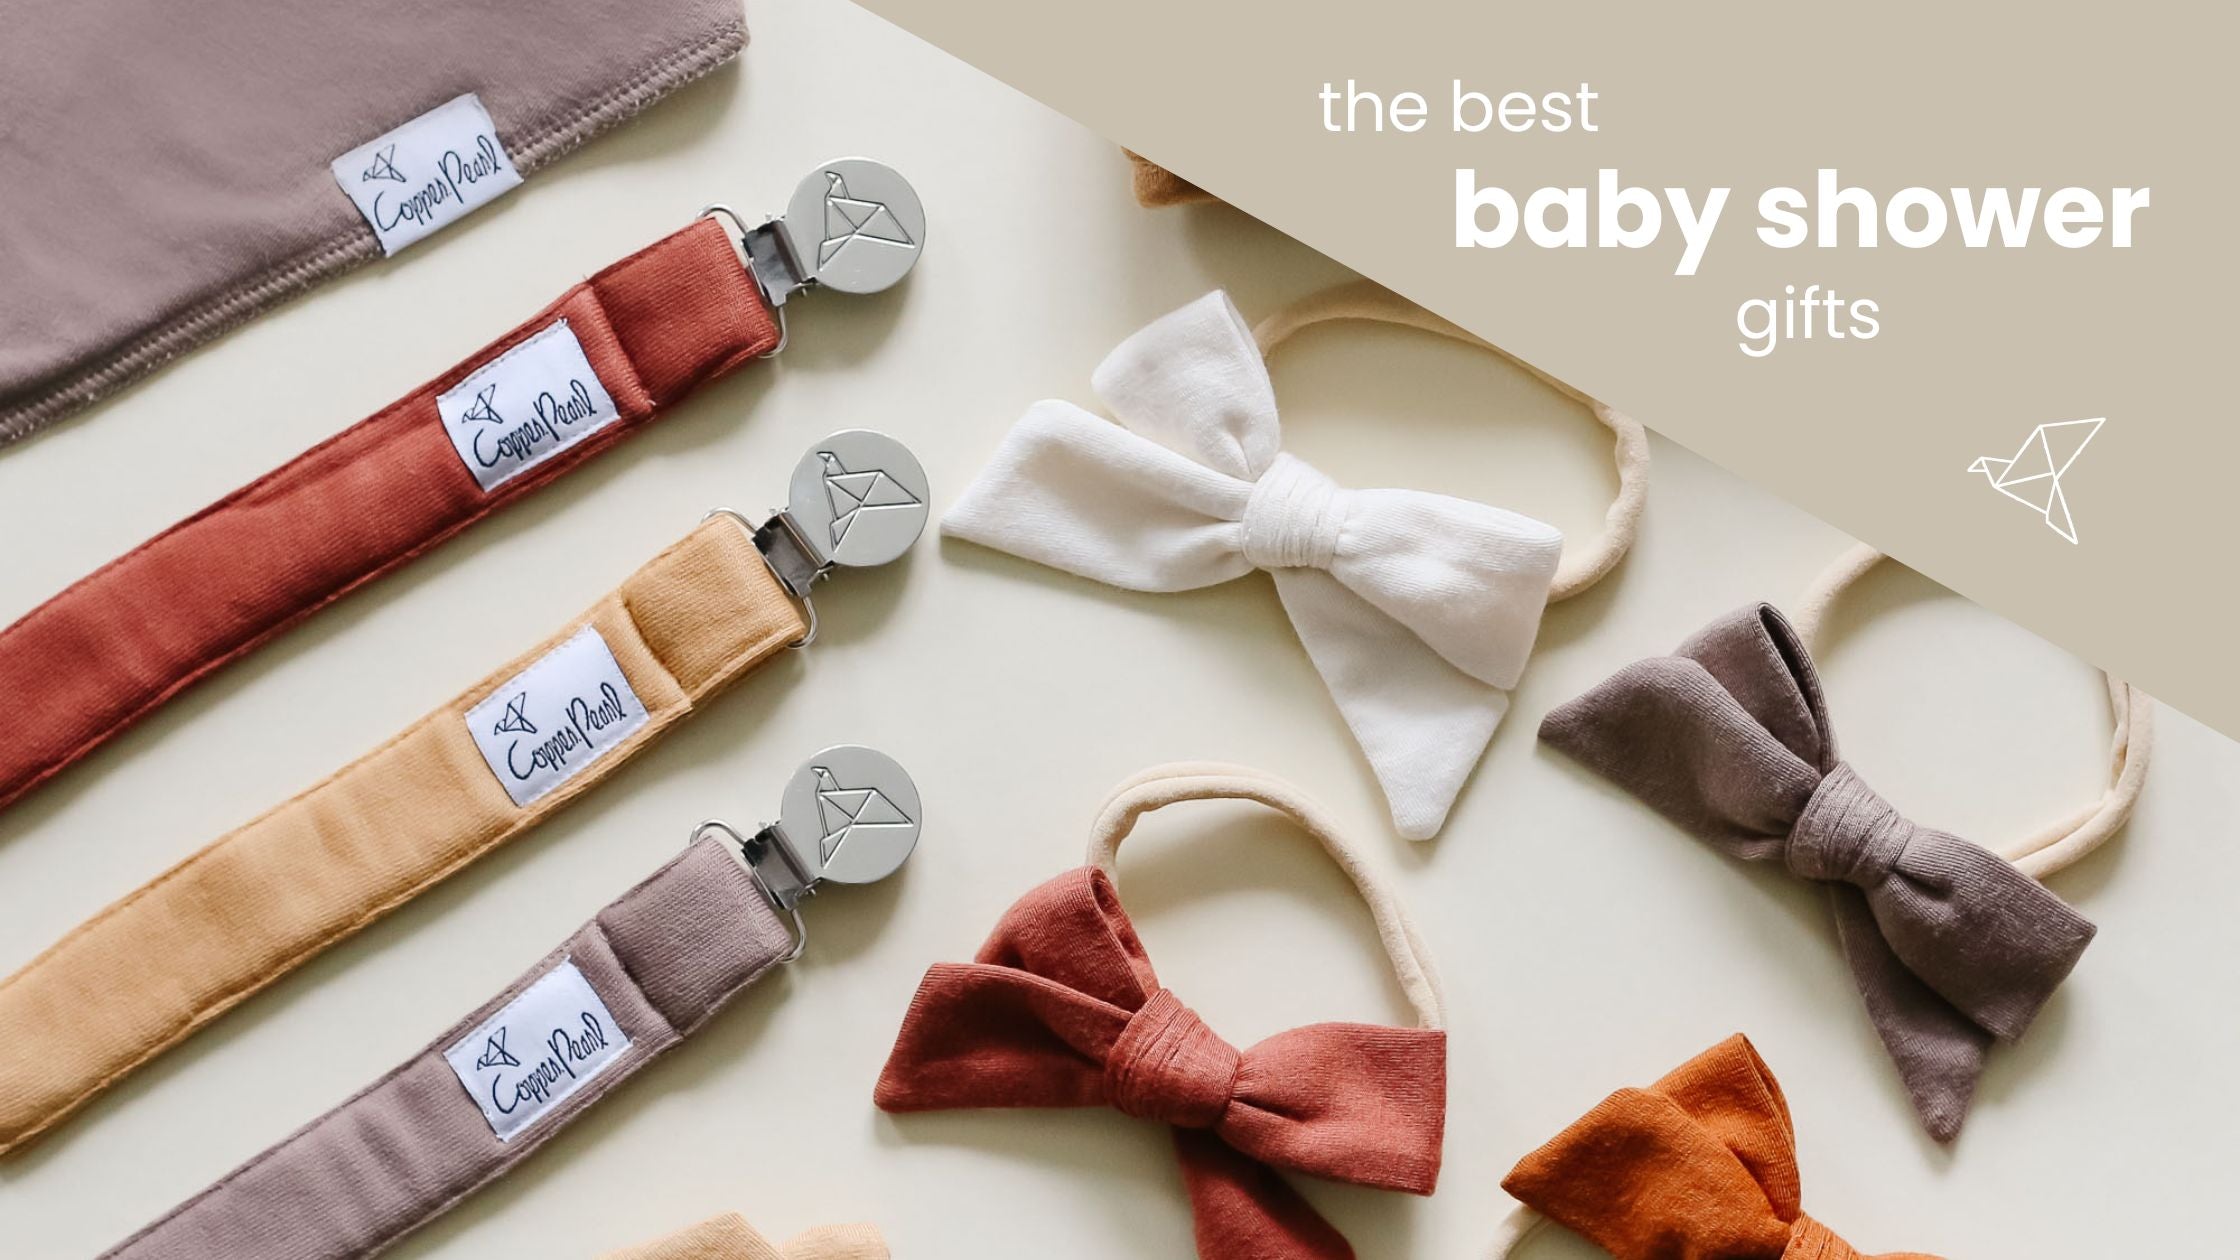 The Best Baby Shower Gifts from Copper Pearl